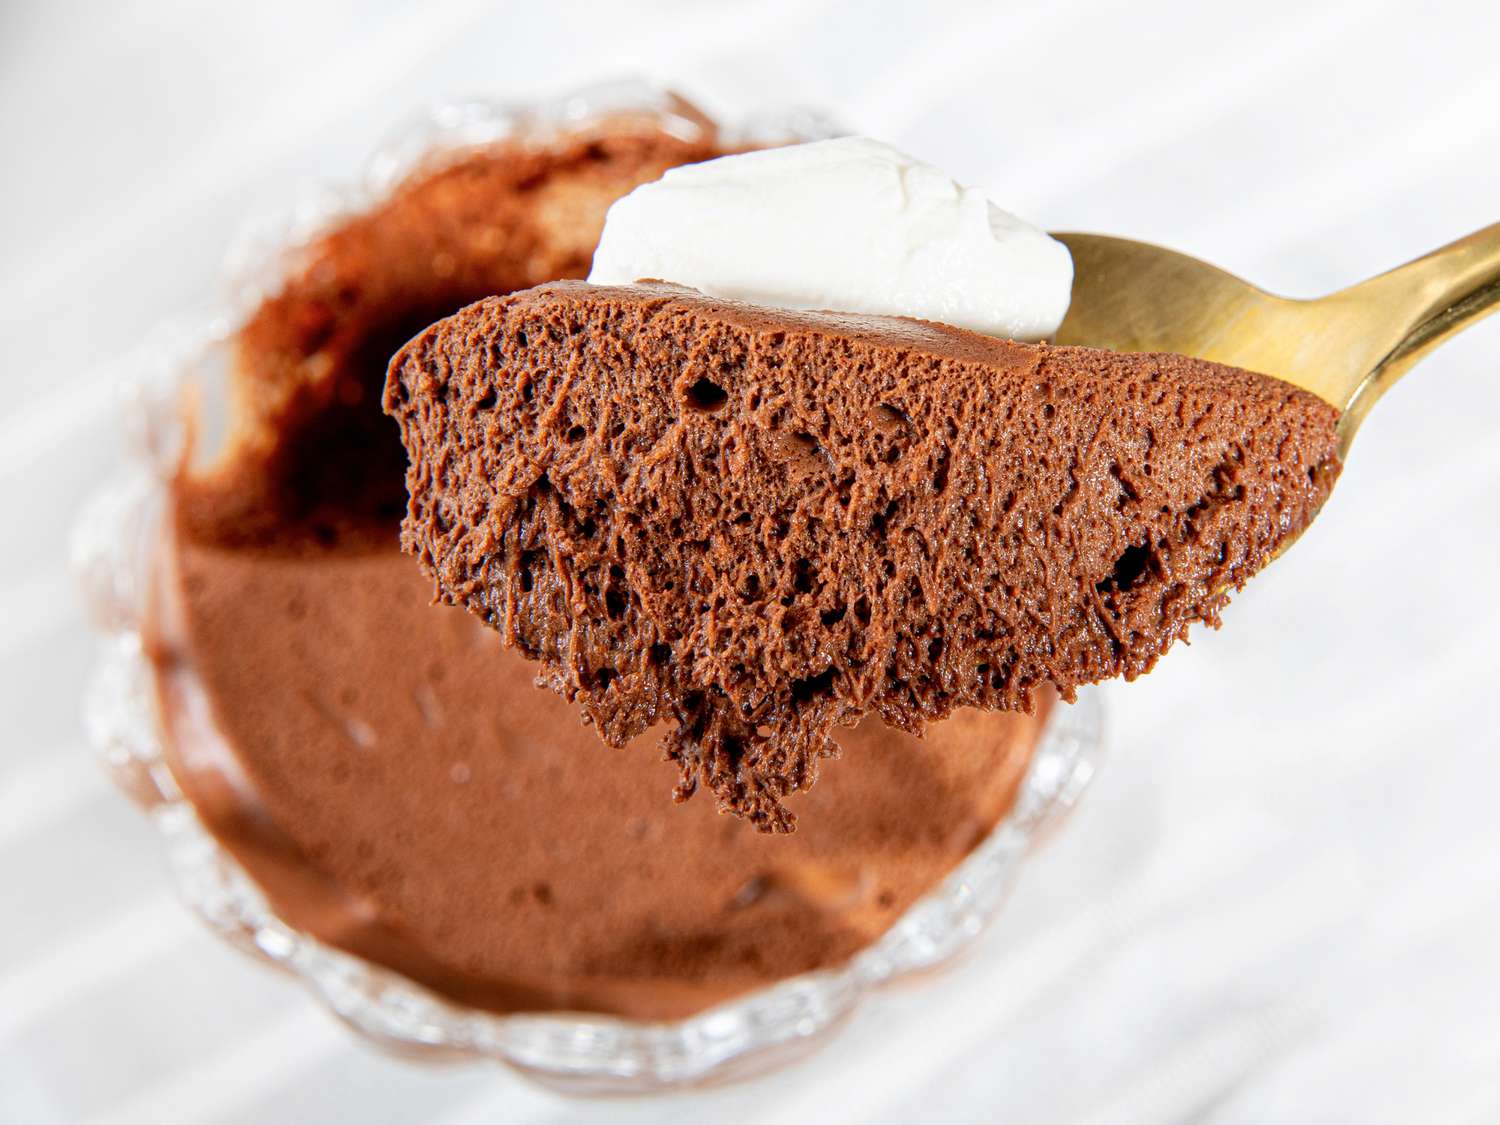 Side angle view of a spoon lifting up chocolate mousse